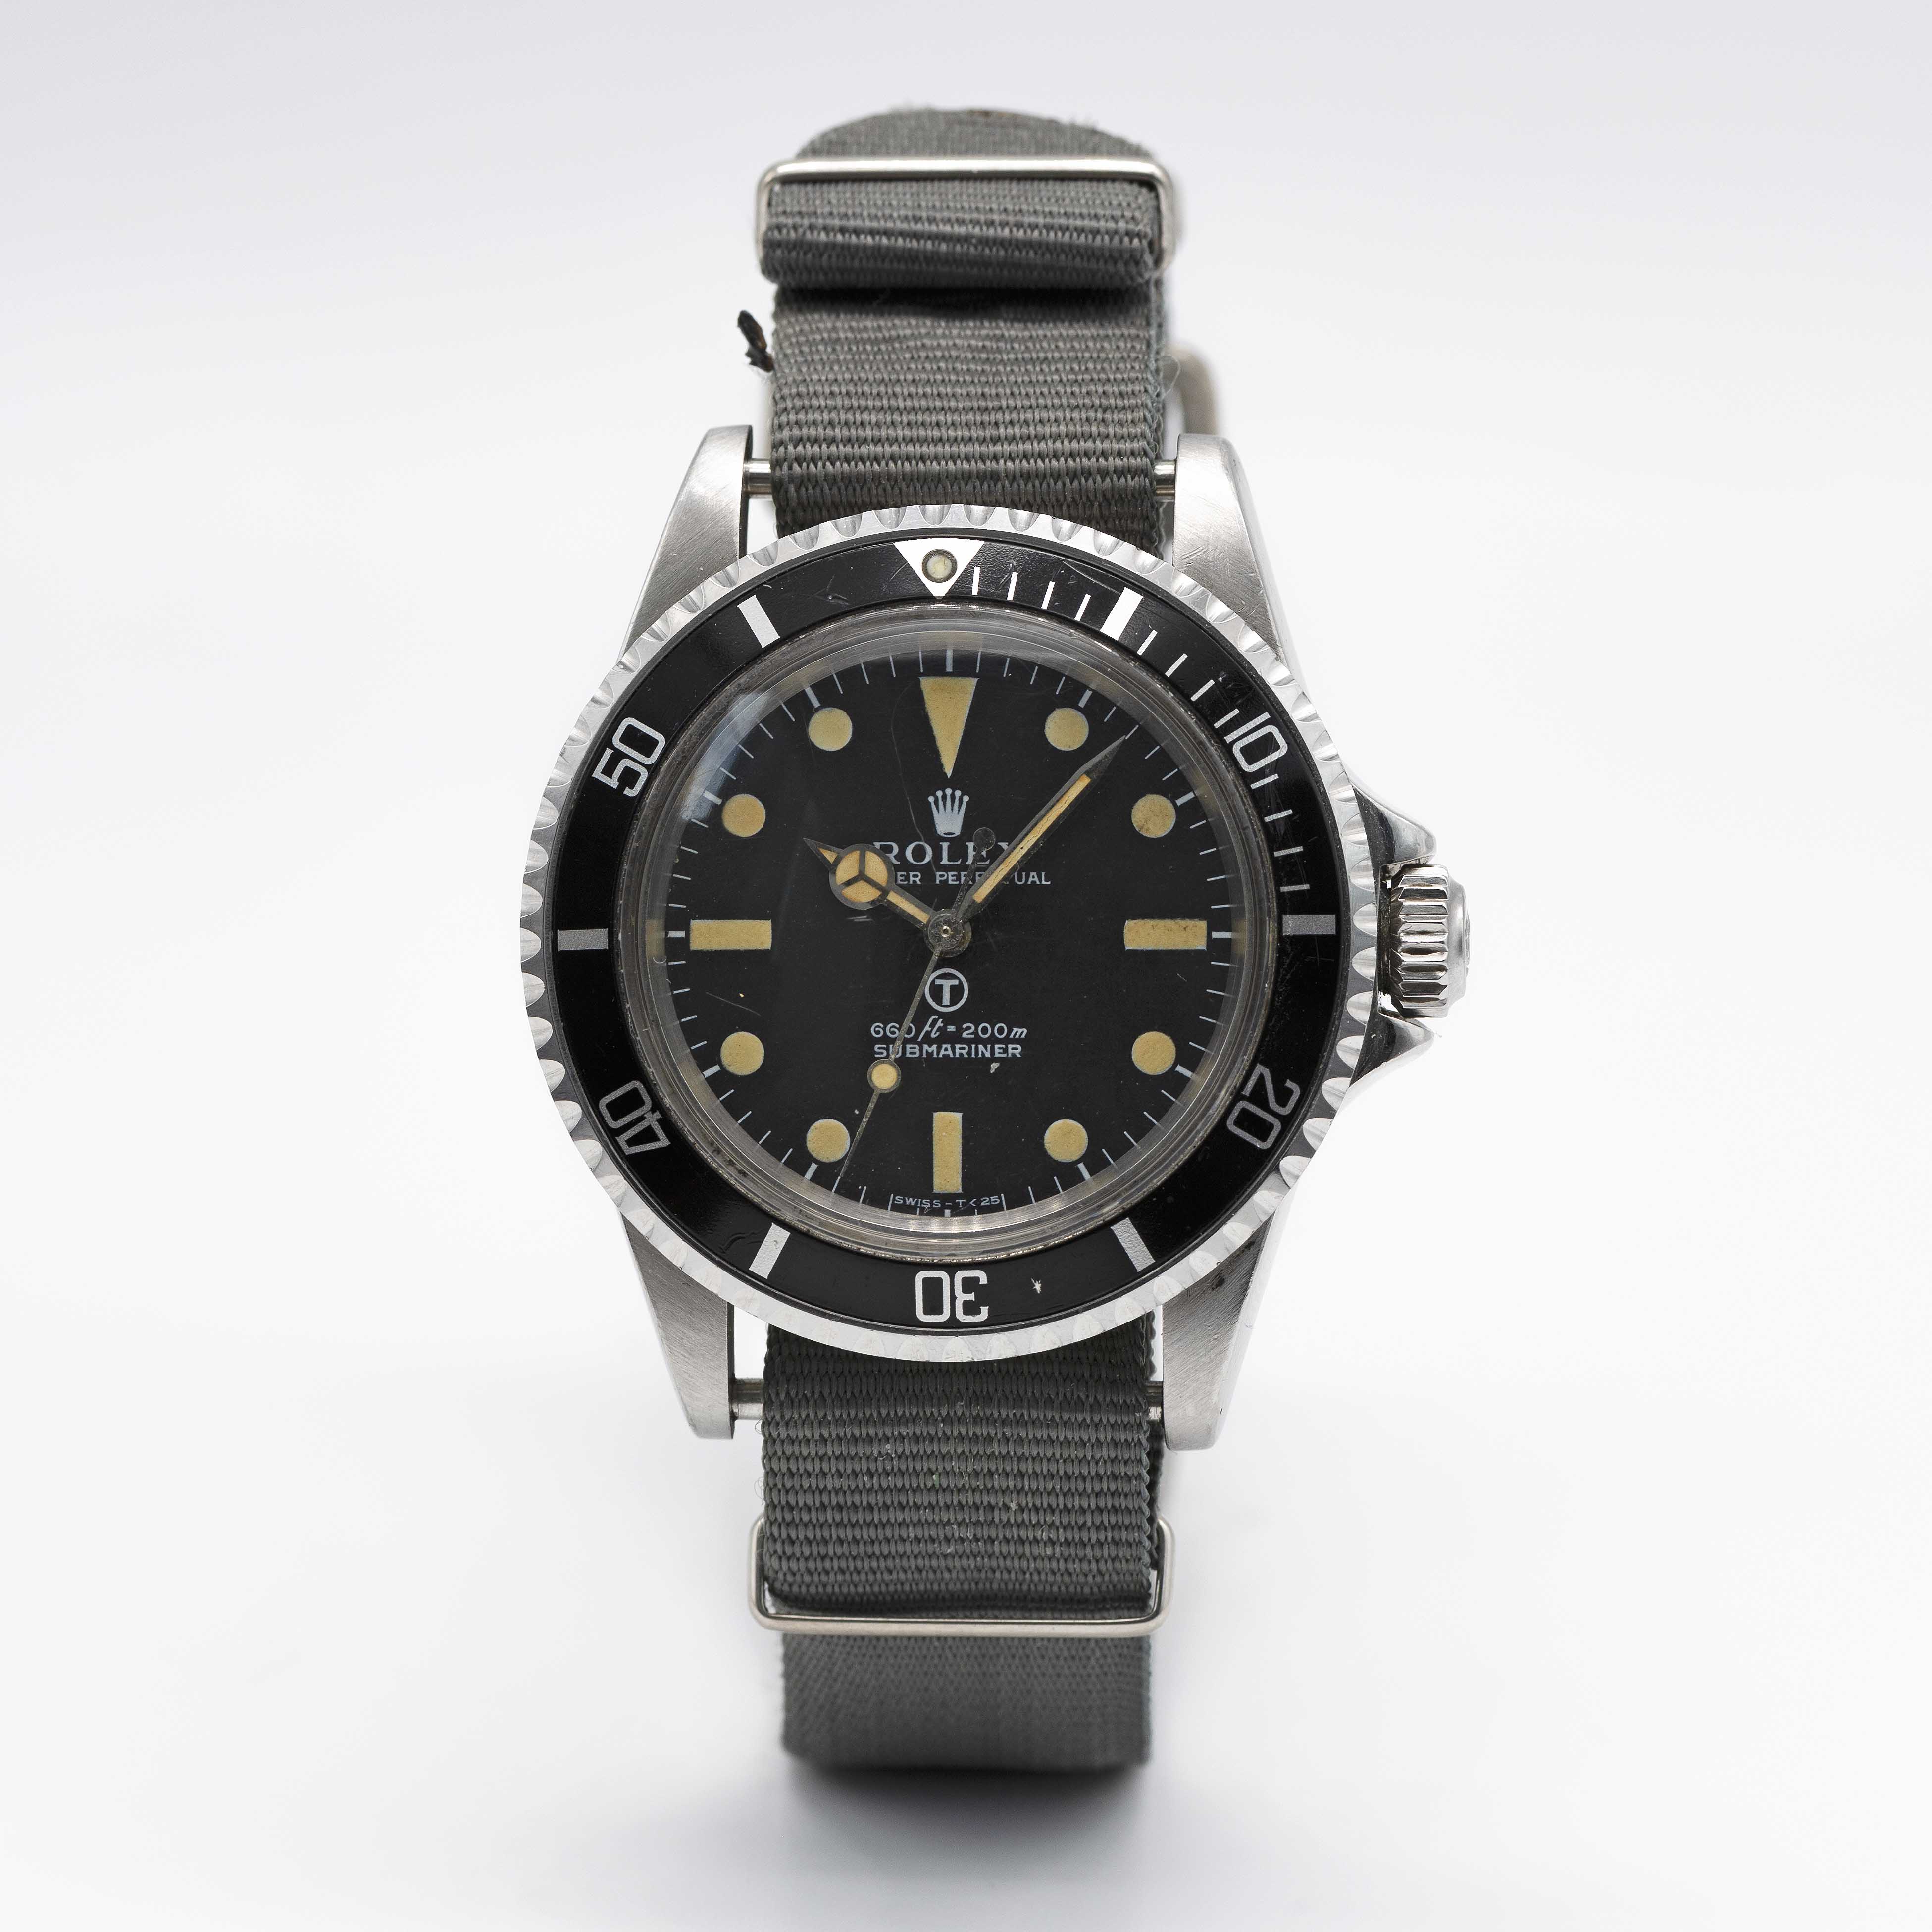 A RARE GENTLEMAN'S STAINLESS STEEL BRITISH MILITARY ROLEX OYSTER PERPETUAL SUBMARINER WRIST WATCH - Image 4 of 10